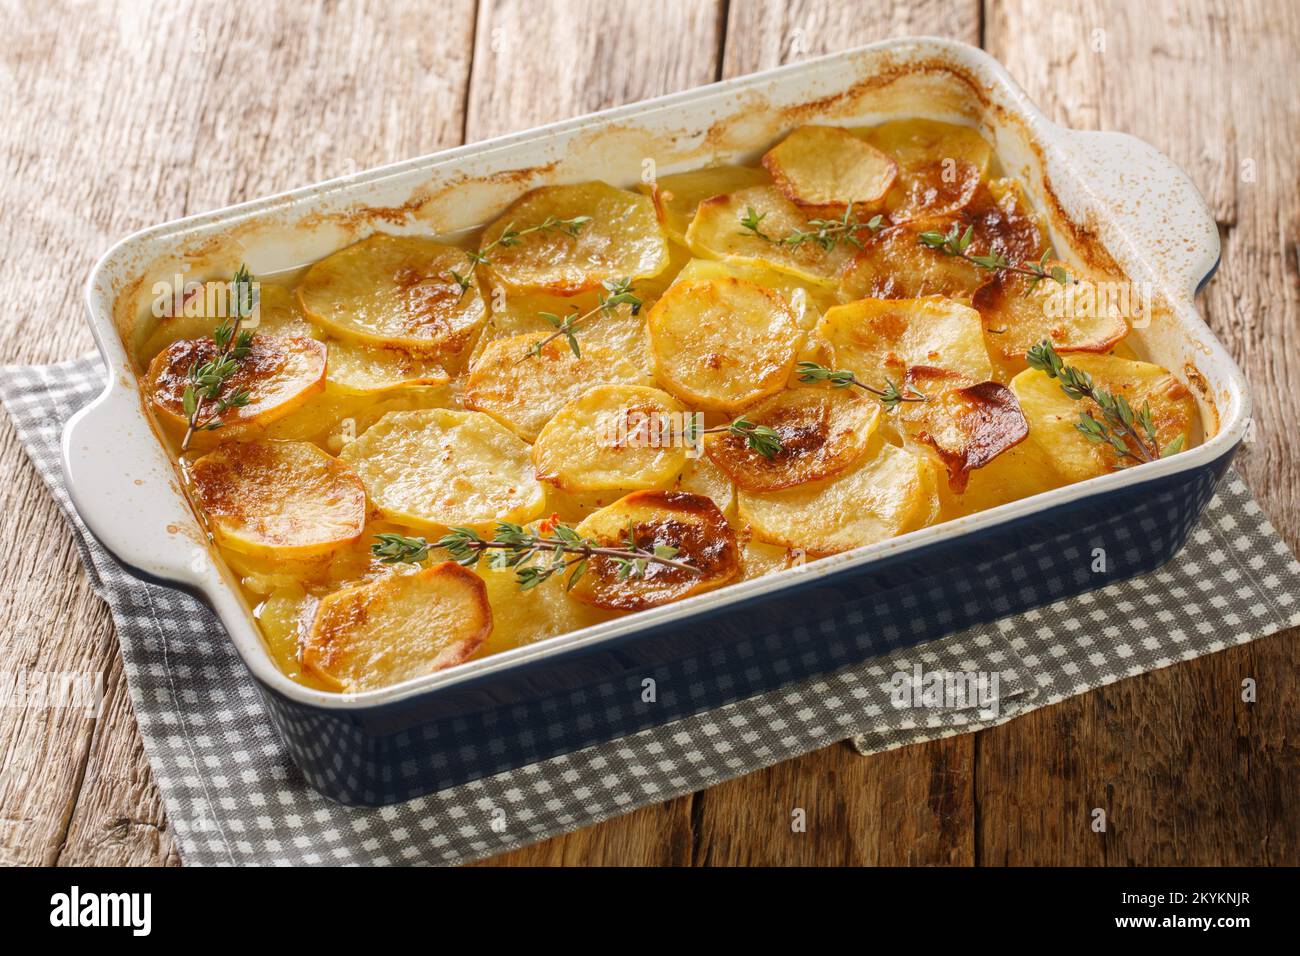 Scalloped potatoes, potato casserole with the addition of herbs, onion and garlic in a ceramic baking dish closeup on the table. Horizontal Stock Photo